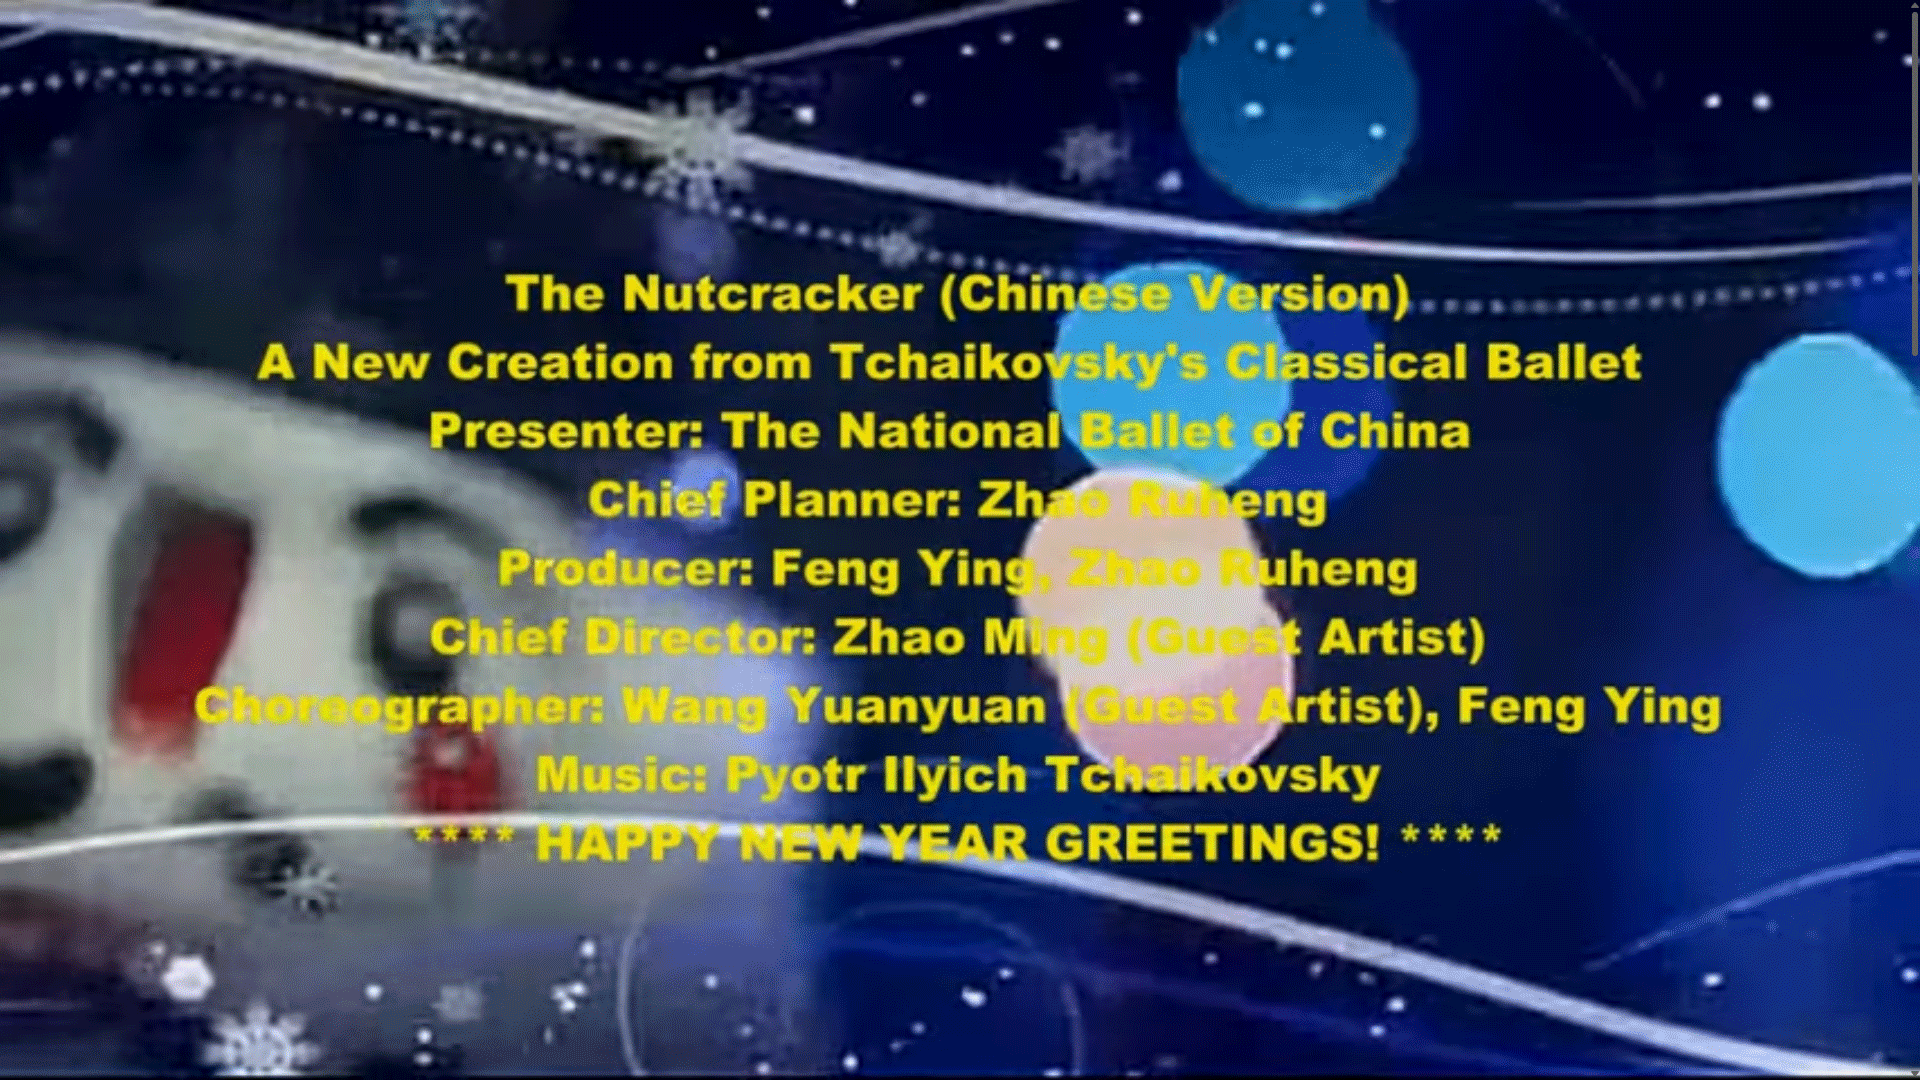 The National Ballet of China – The Nutcracker (Chinese Version)